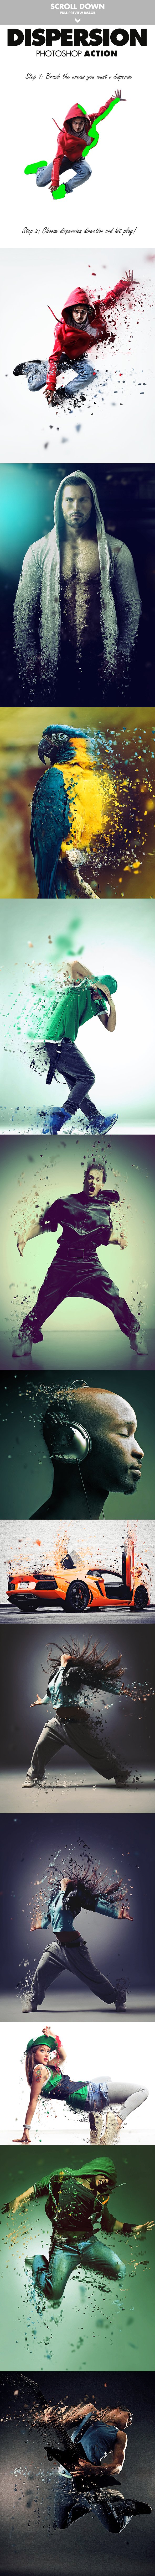 Dispersion Photoshop Actionpreview image.